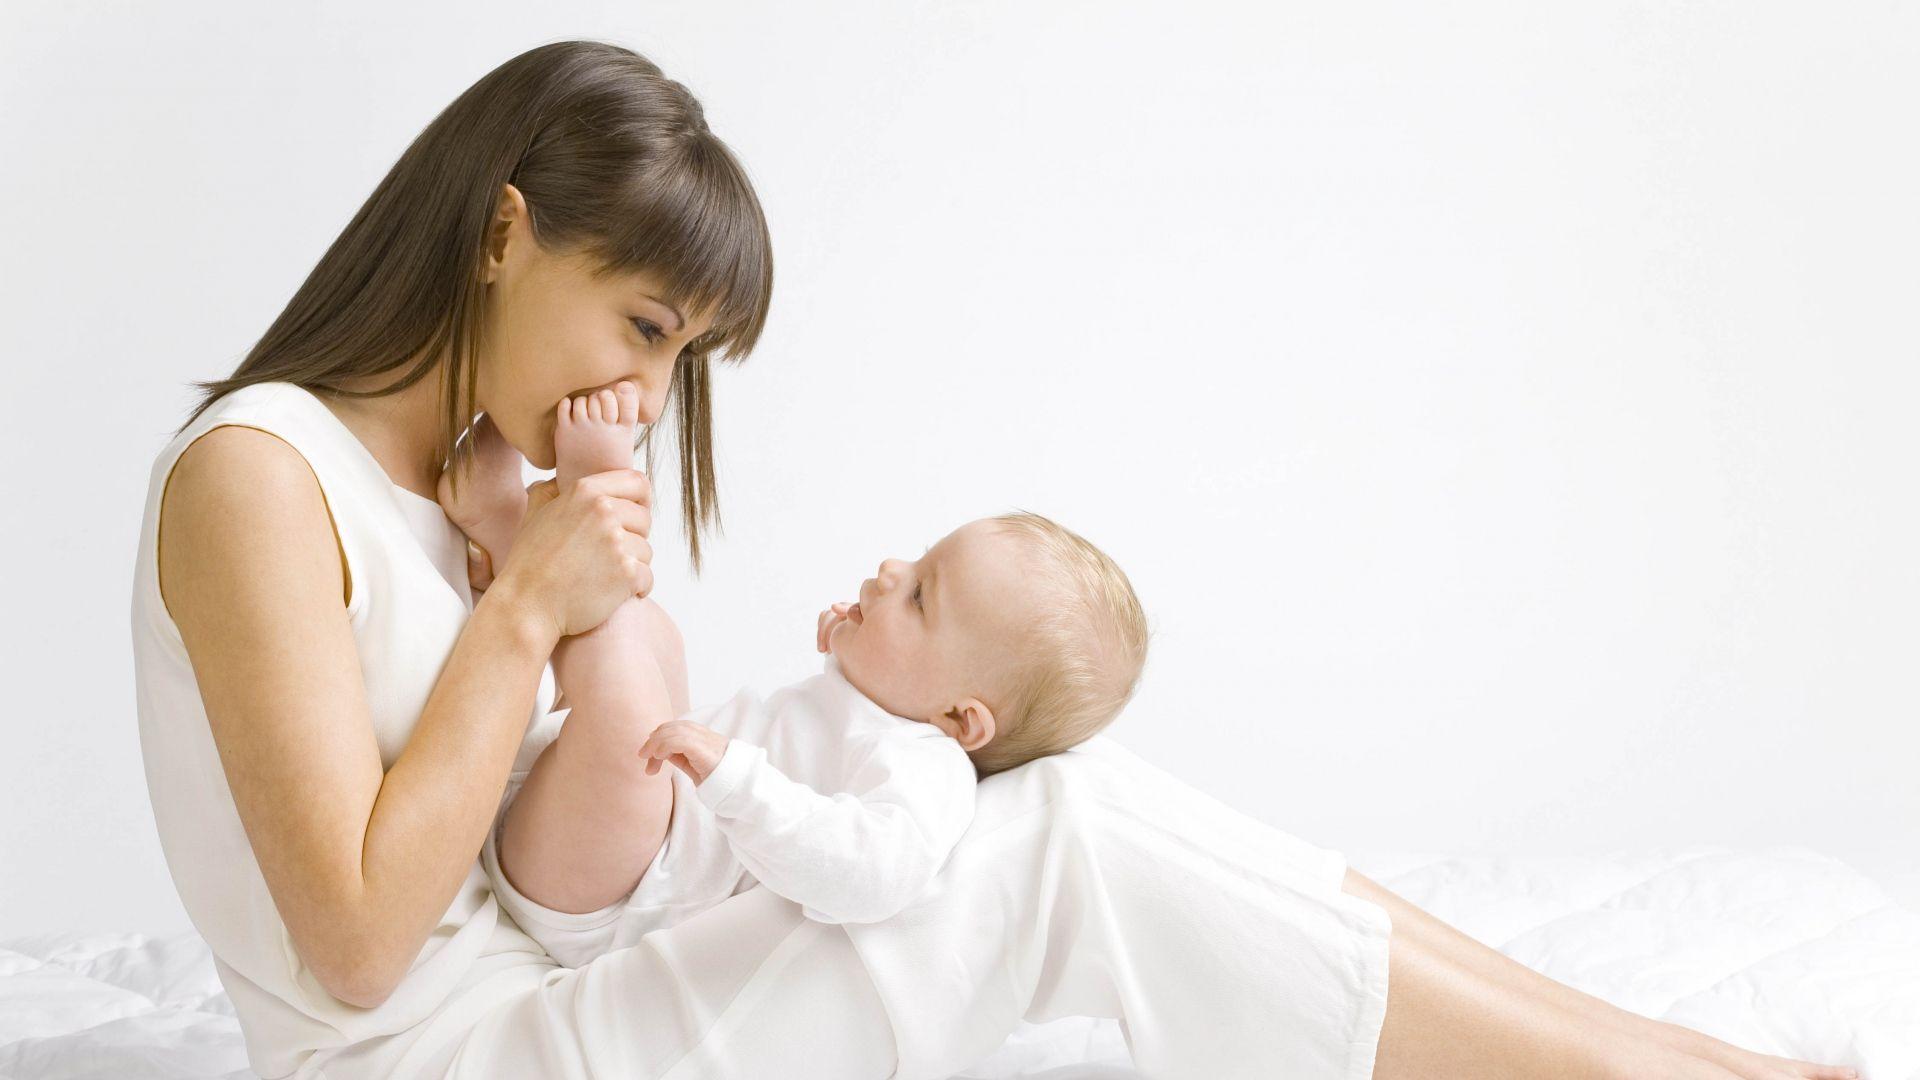 Download Wallpaper 1920x1080 mother, child, baby, love, white